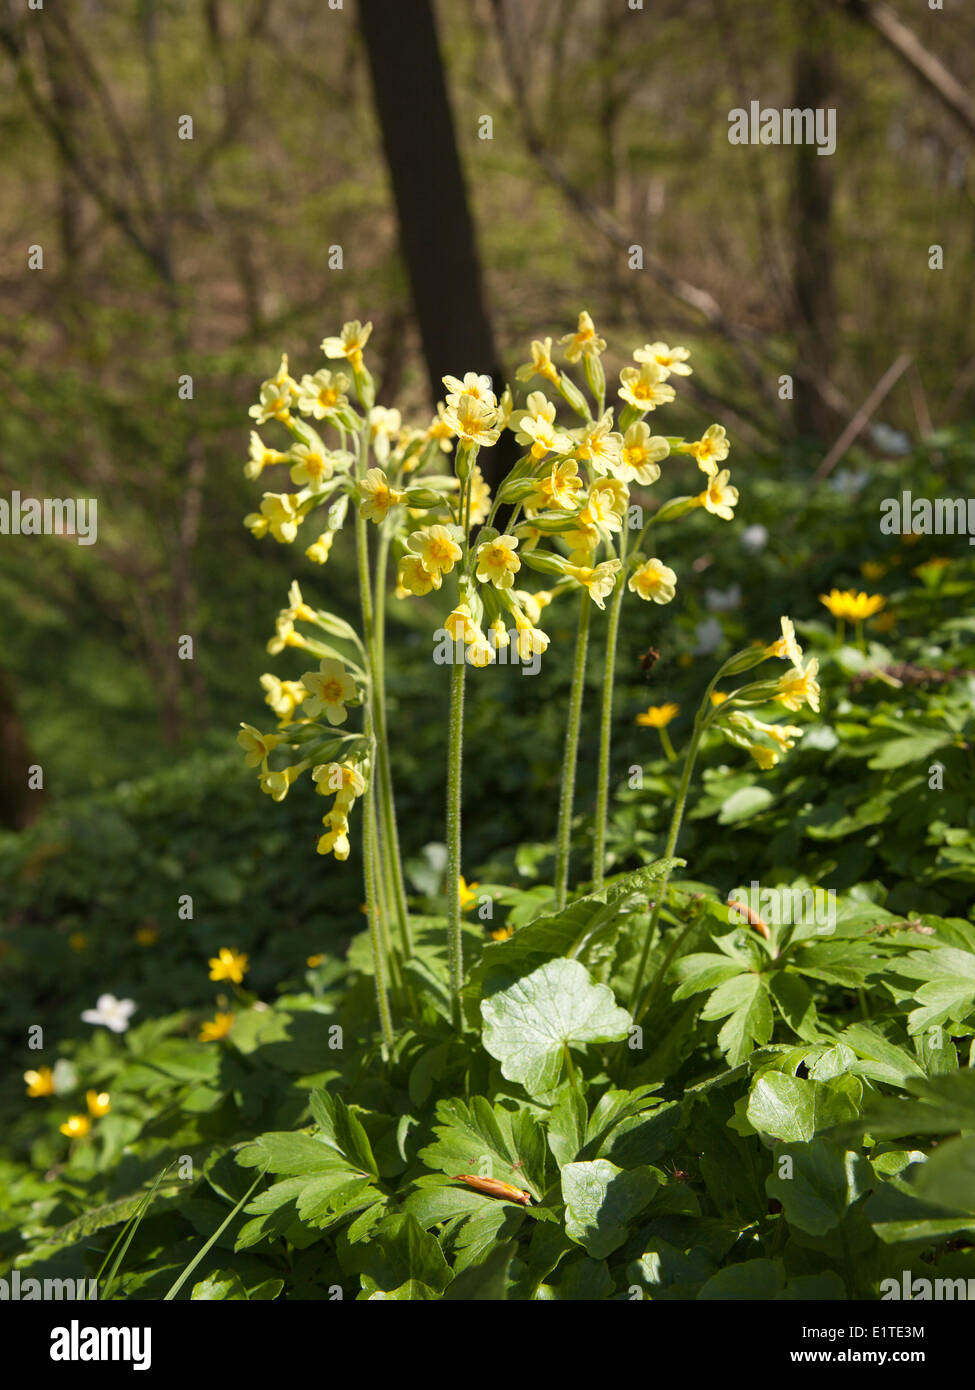 Oxlip rather rare plant southeastern eastern parts Netherlands It grows in deciduous forests forest edges. Stock Photo